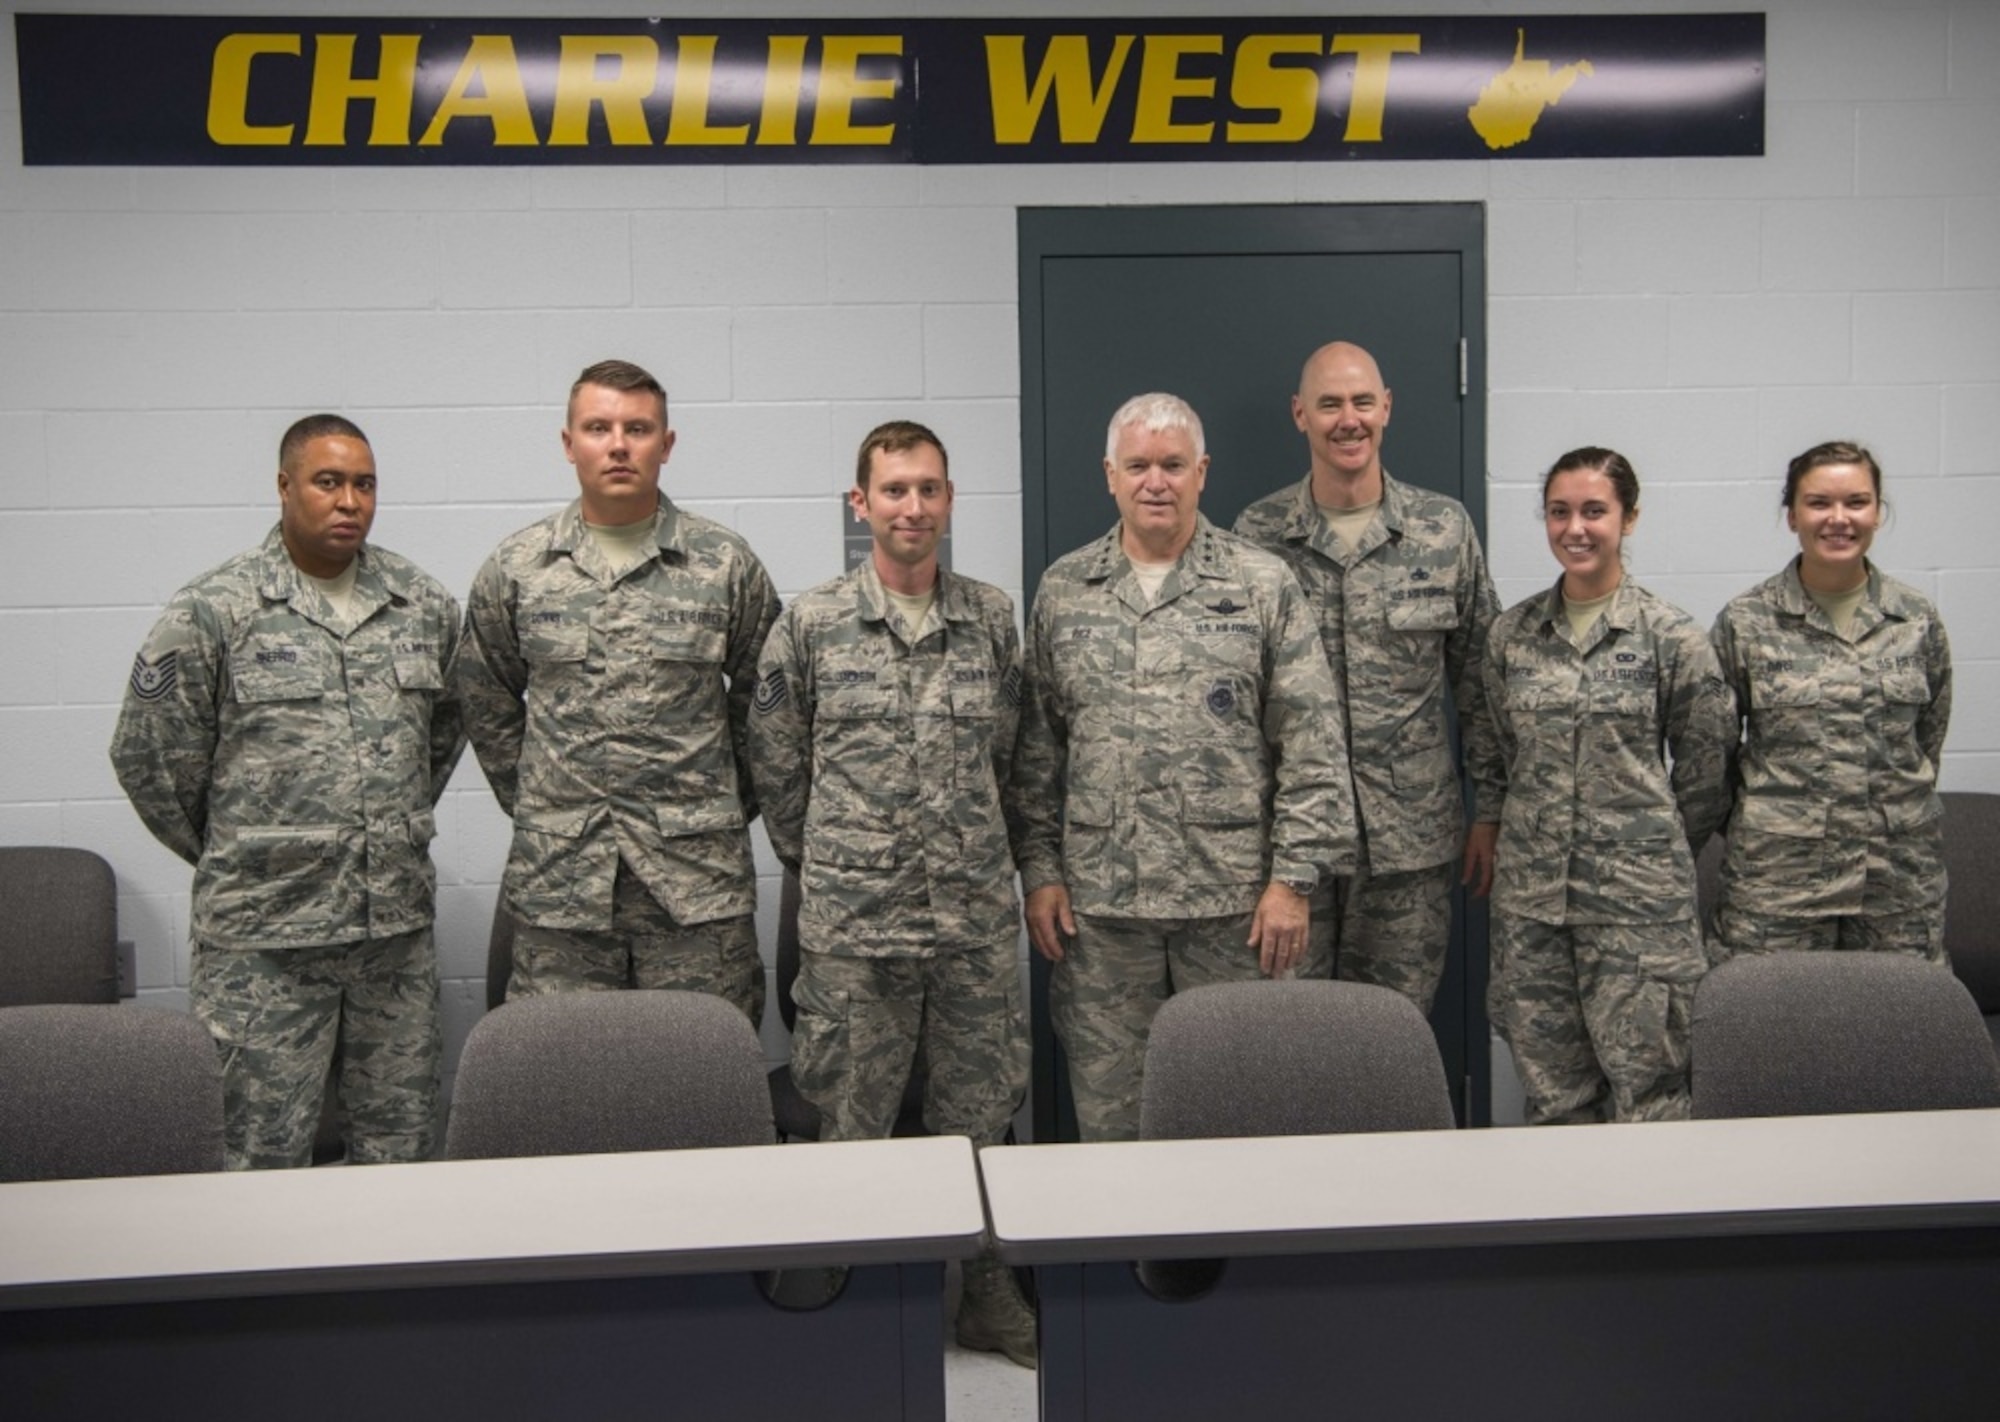 Director of the Air National Guard, Lt. Gen. L. Scott Rice, and ANG Command Chief Master Sgt. Ronald Anderson, pose with Tech. Sgt. Anthony Sherrod, Staff Sgt. Randy Downs, Tech. Sgt. Jeffery Jackson, Senior Airman Mallory Ranker, and Airman 1st Class Autumn Davis after a coining ceremony held July 26, 2017 at McLaughlin Air National Guard Base, Charleston, W.Va. Rice and Anderson recognized the outstanding accomplishments of the Airmen for their contributions to the mission and heroism off duty. (U.S. Air National Guard photo by Tech. Sgt. De-Juan Haley) 